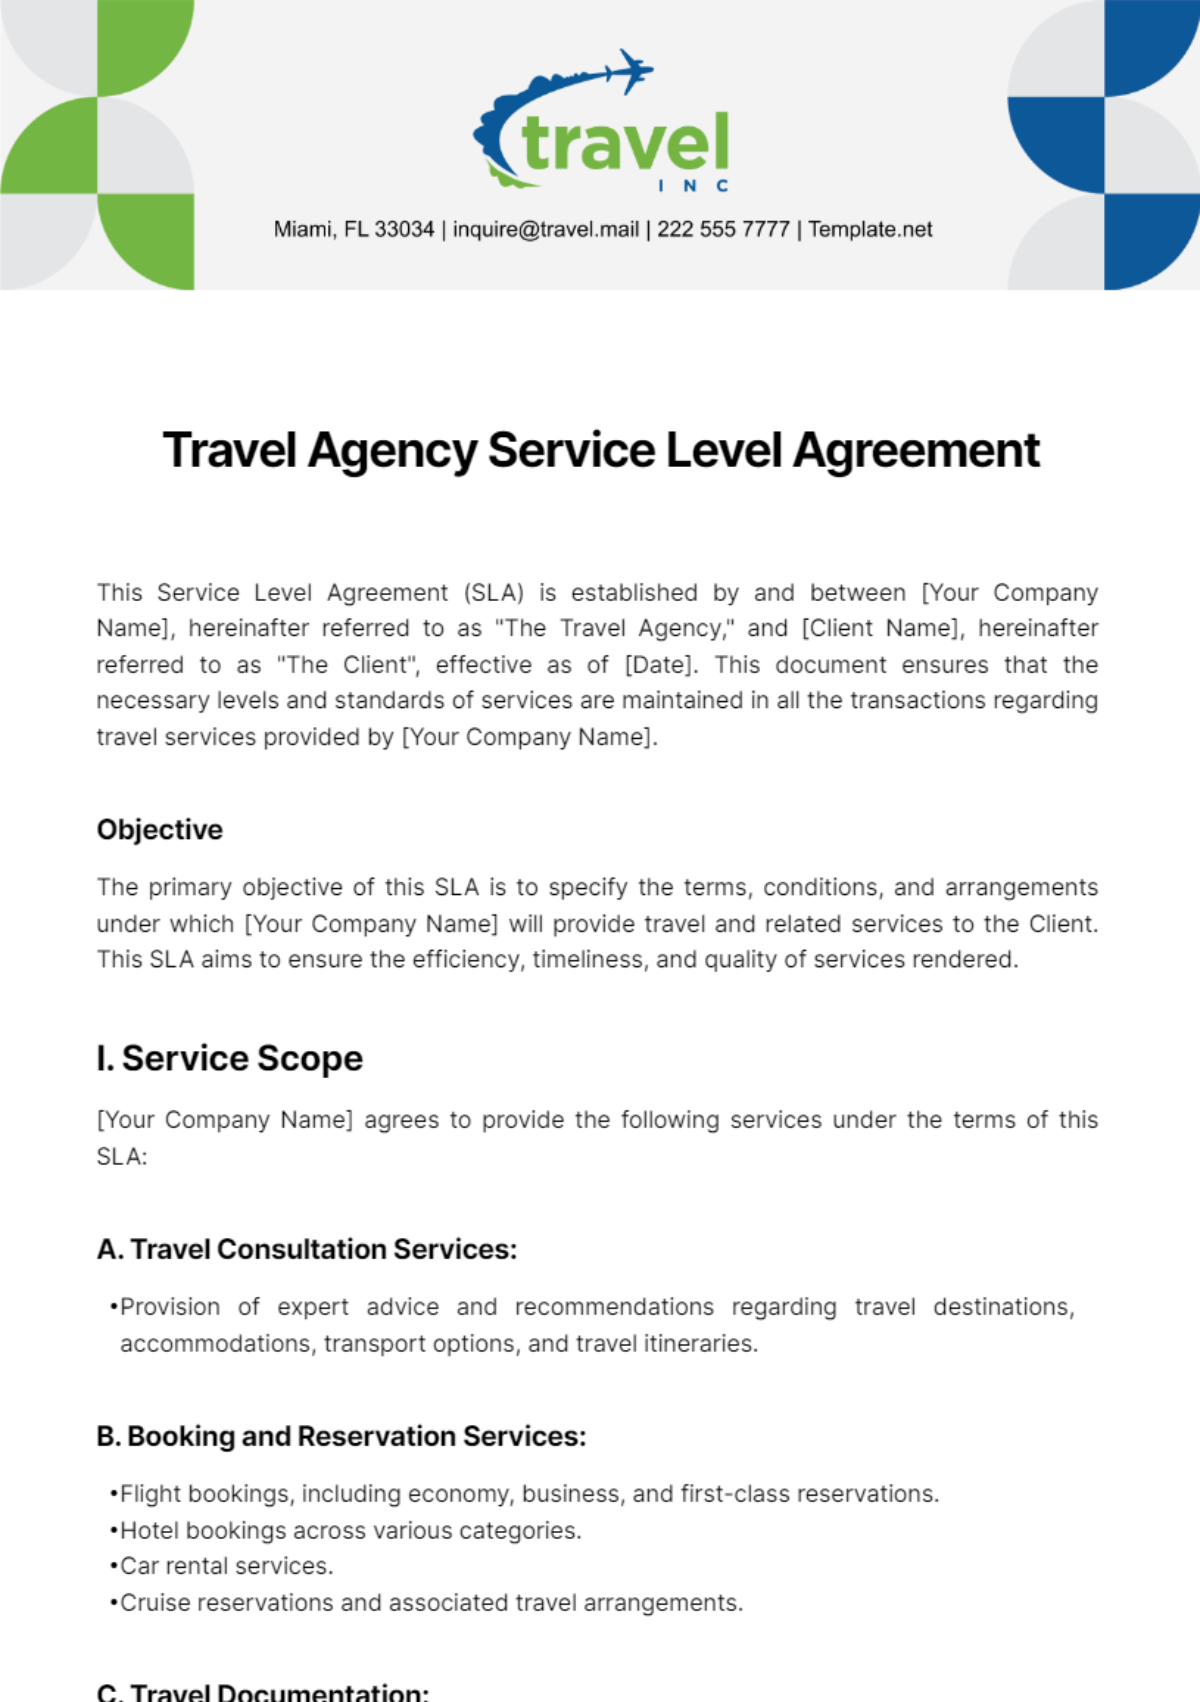 Free Travel Agency Service Level Agreement Template